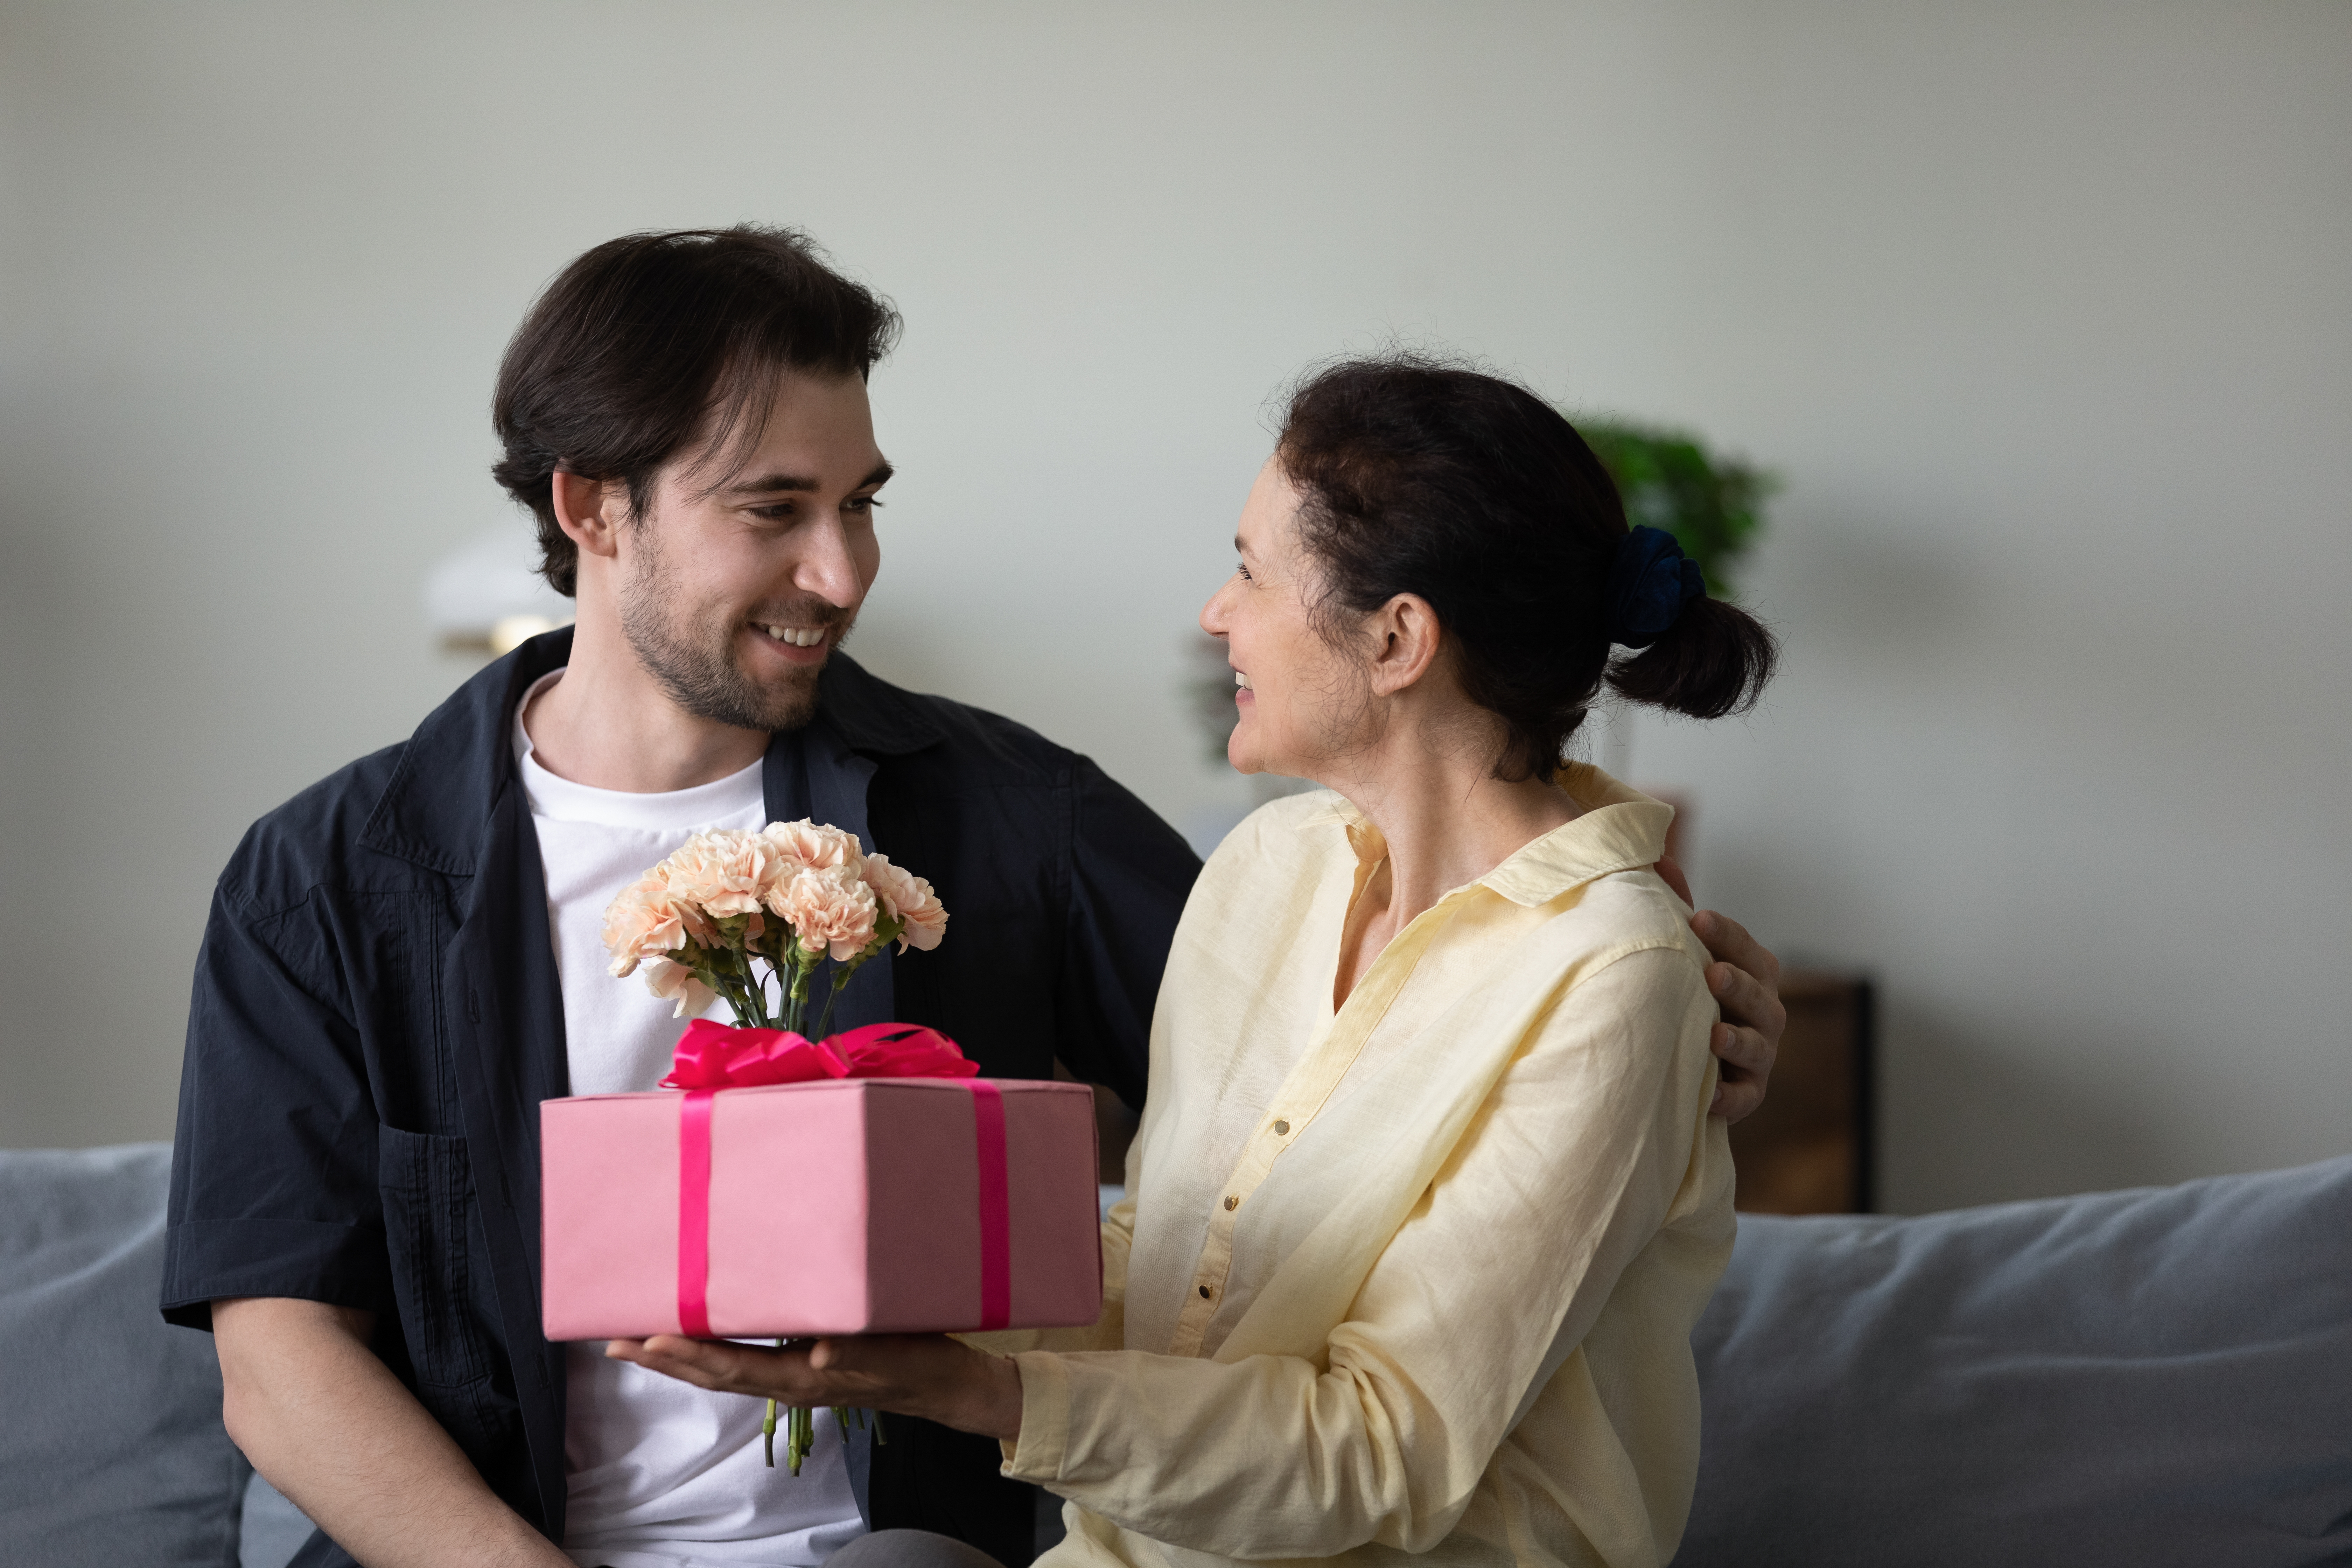 A woman receiving a gift from a young man | Source: Shutterstock